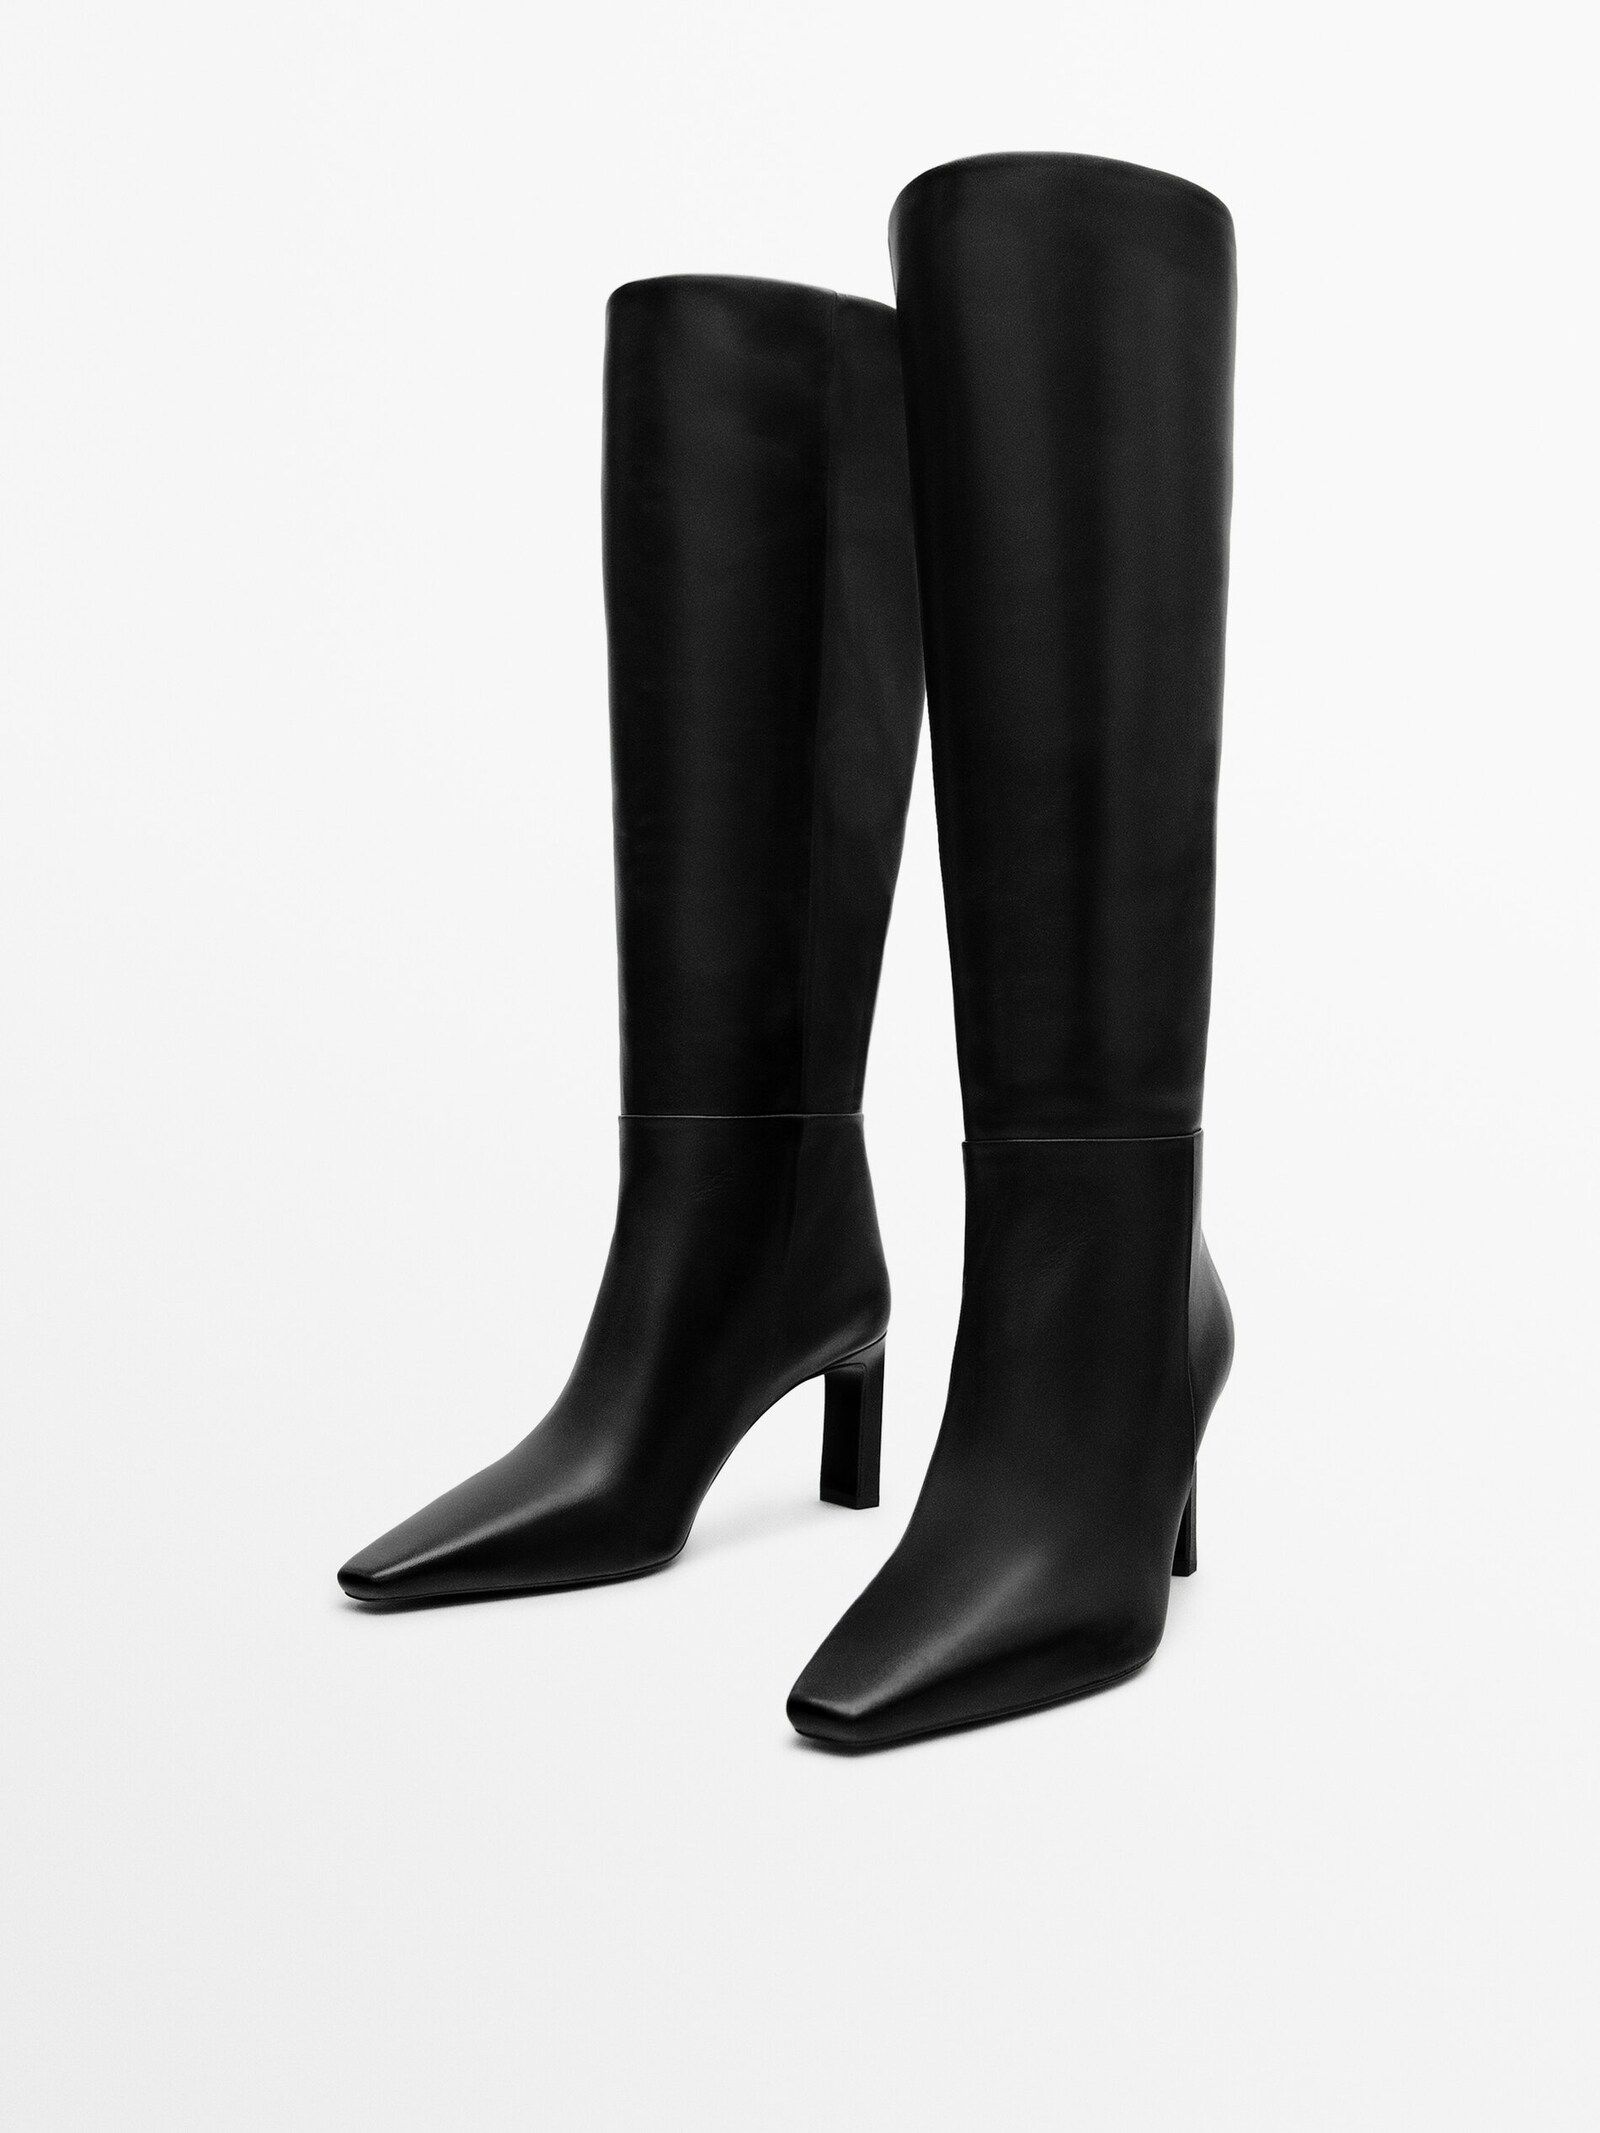 Leather boots with square heel | Massimo Dutti UK